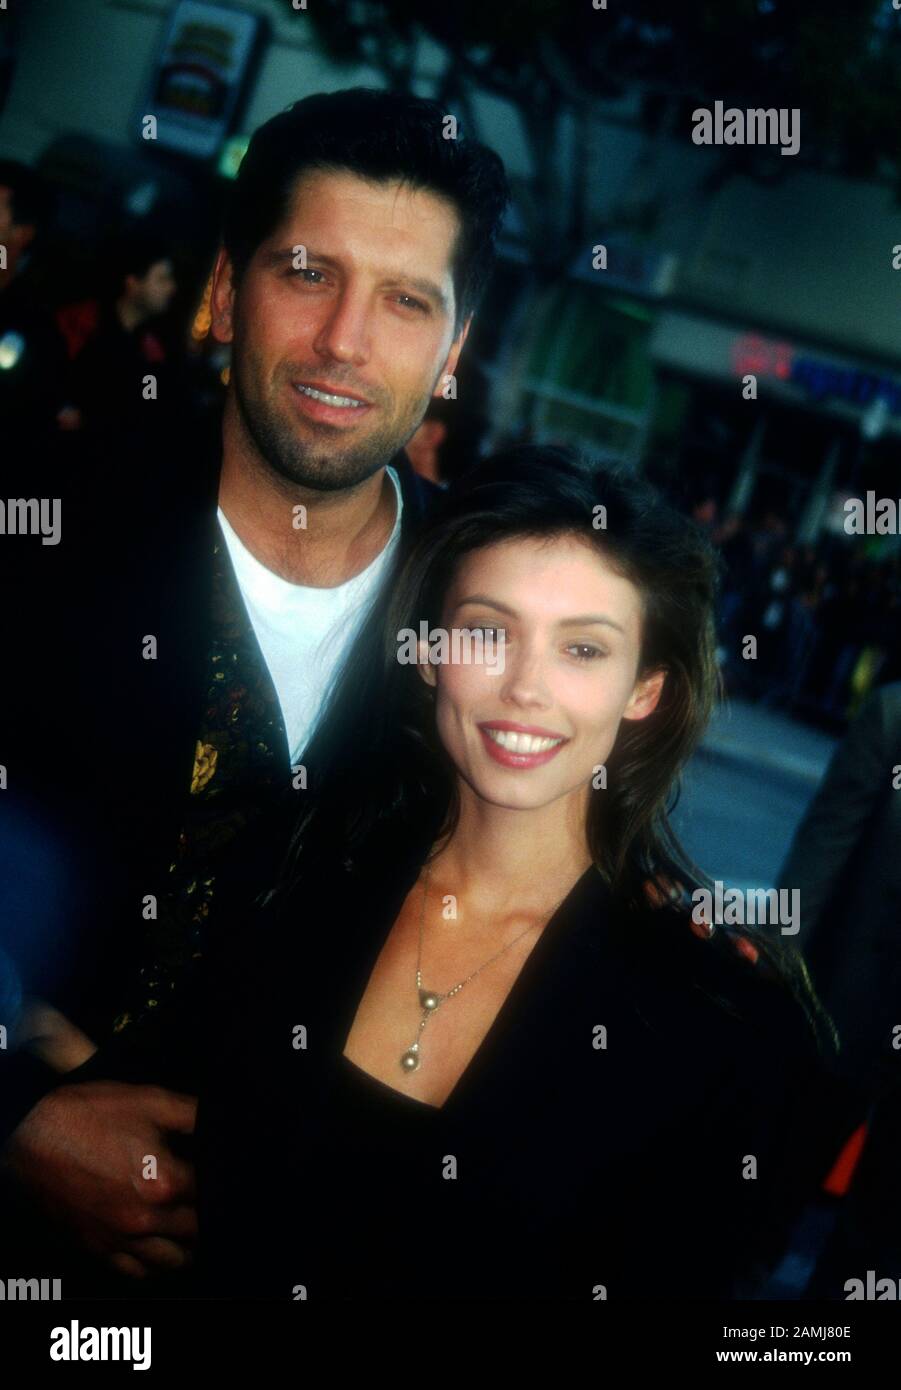 Westwood, California, USA 18th May 1995 Actor Carmine Zozzora and actress Jane March attend 'Die Hard 3' Premiere on May 18, 1995 at Regency Village Theatre in Westwood, California, USA. Photo by Barry King/Alamy Stock Photo Stock Photo